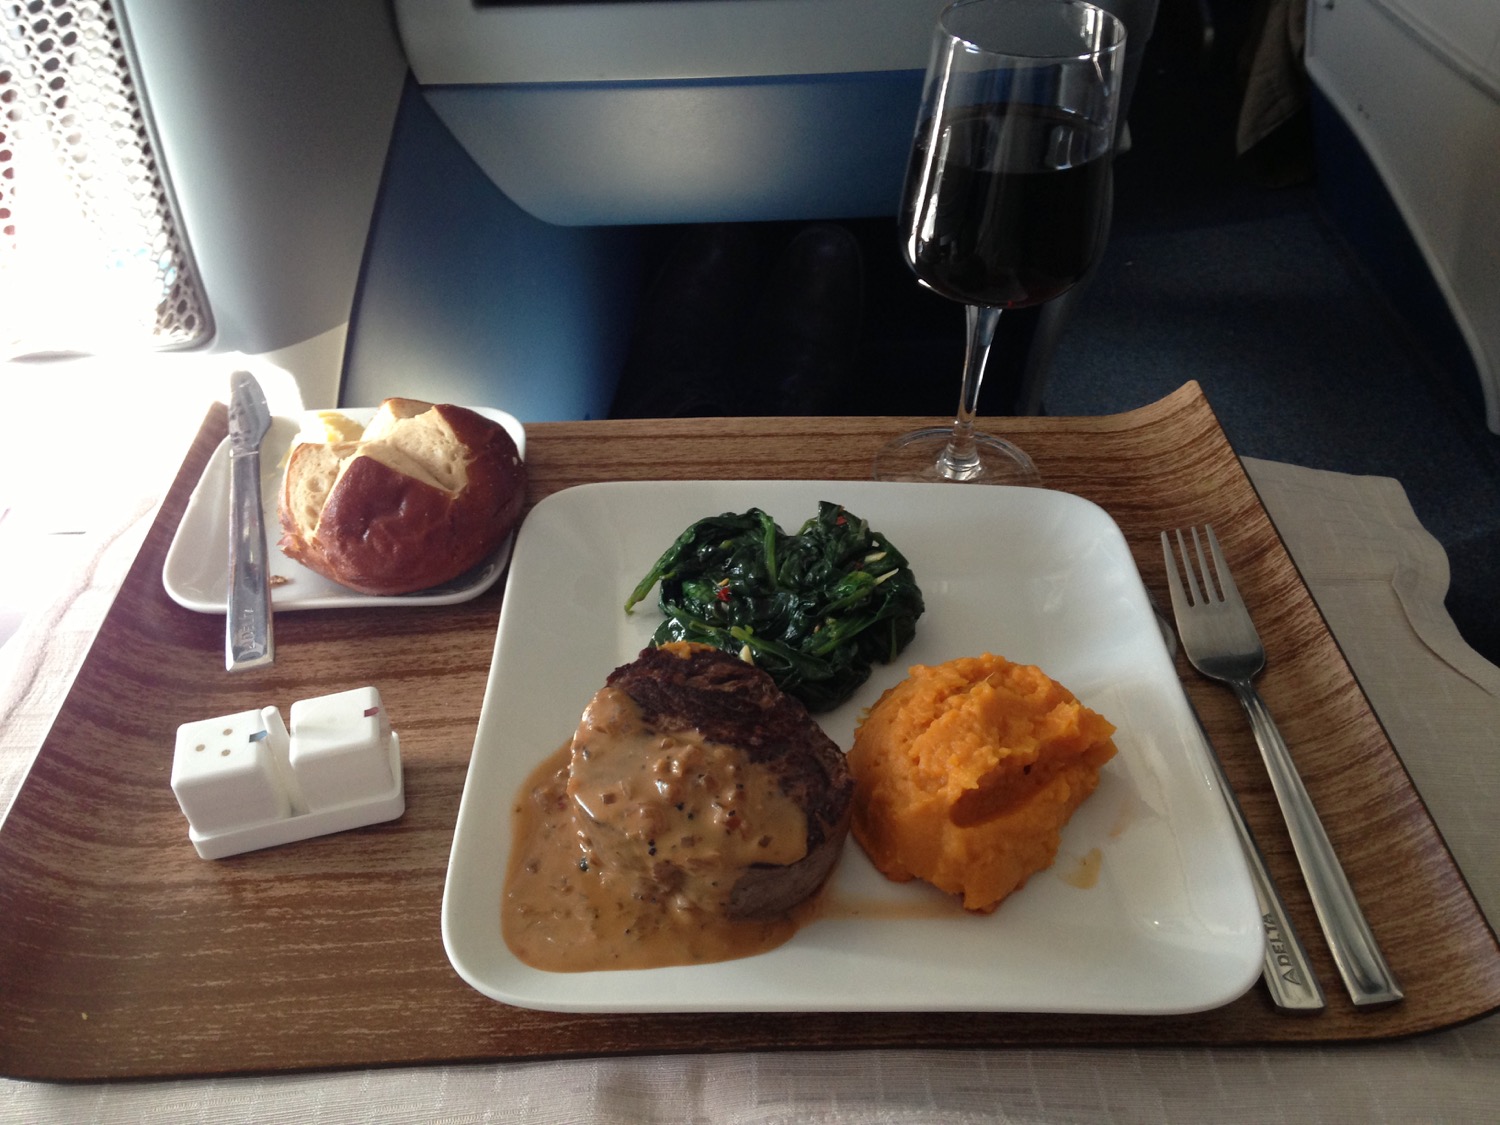 A Perfectly Average Lunch LHRJFK in Delta Business Live and Let's Fly